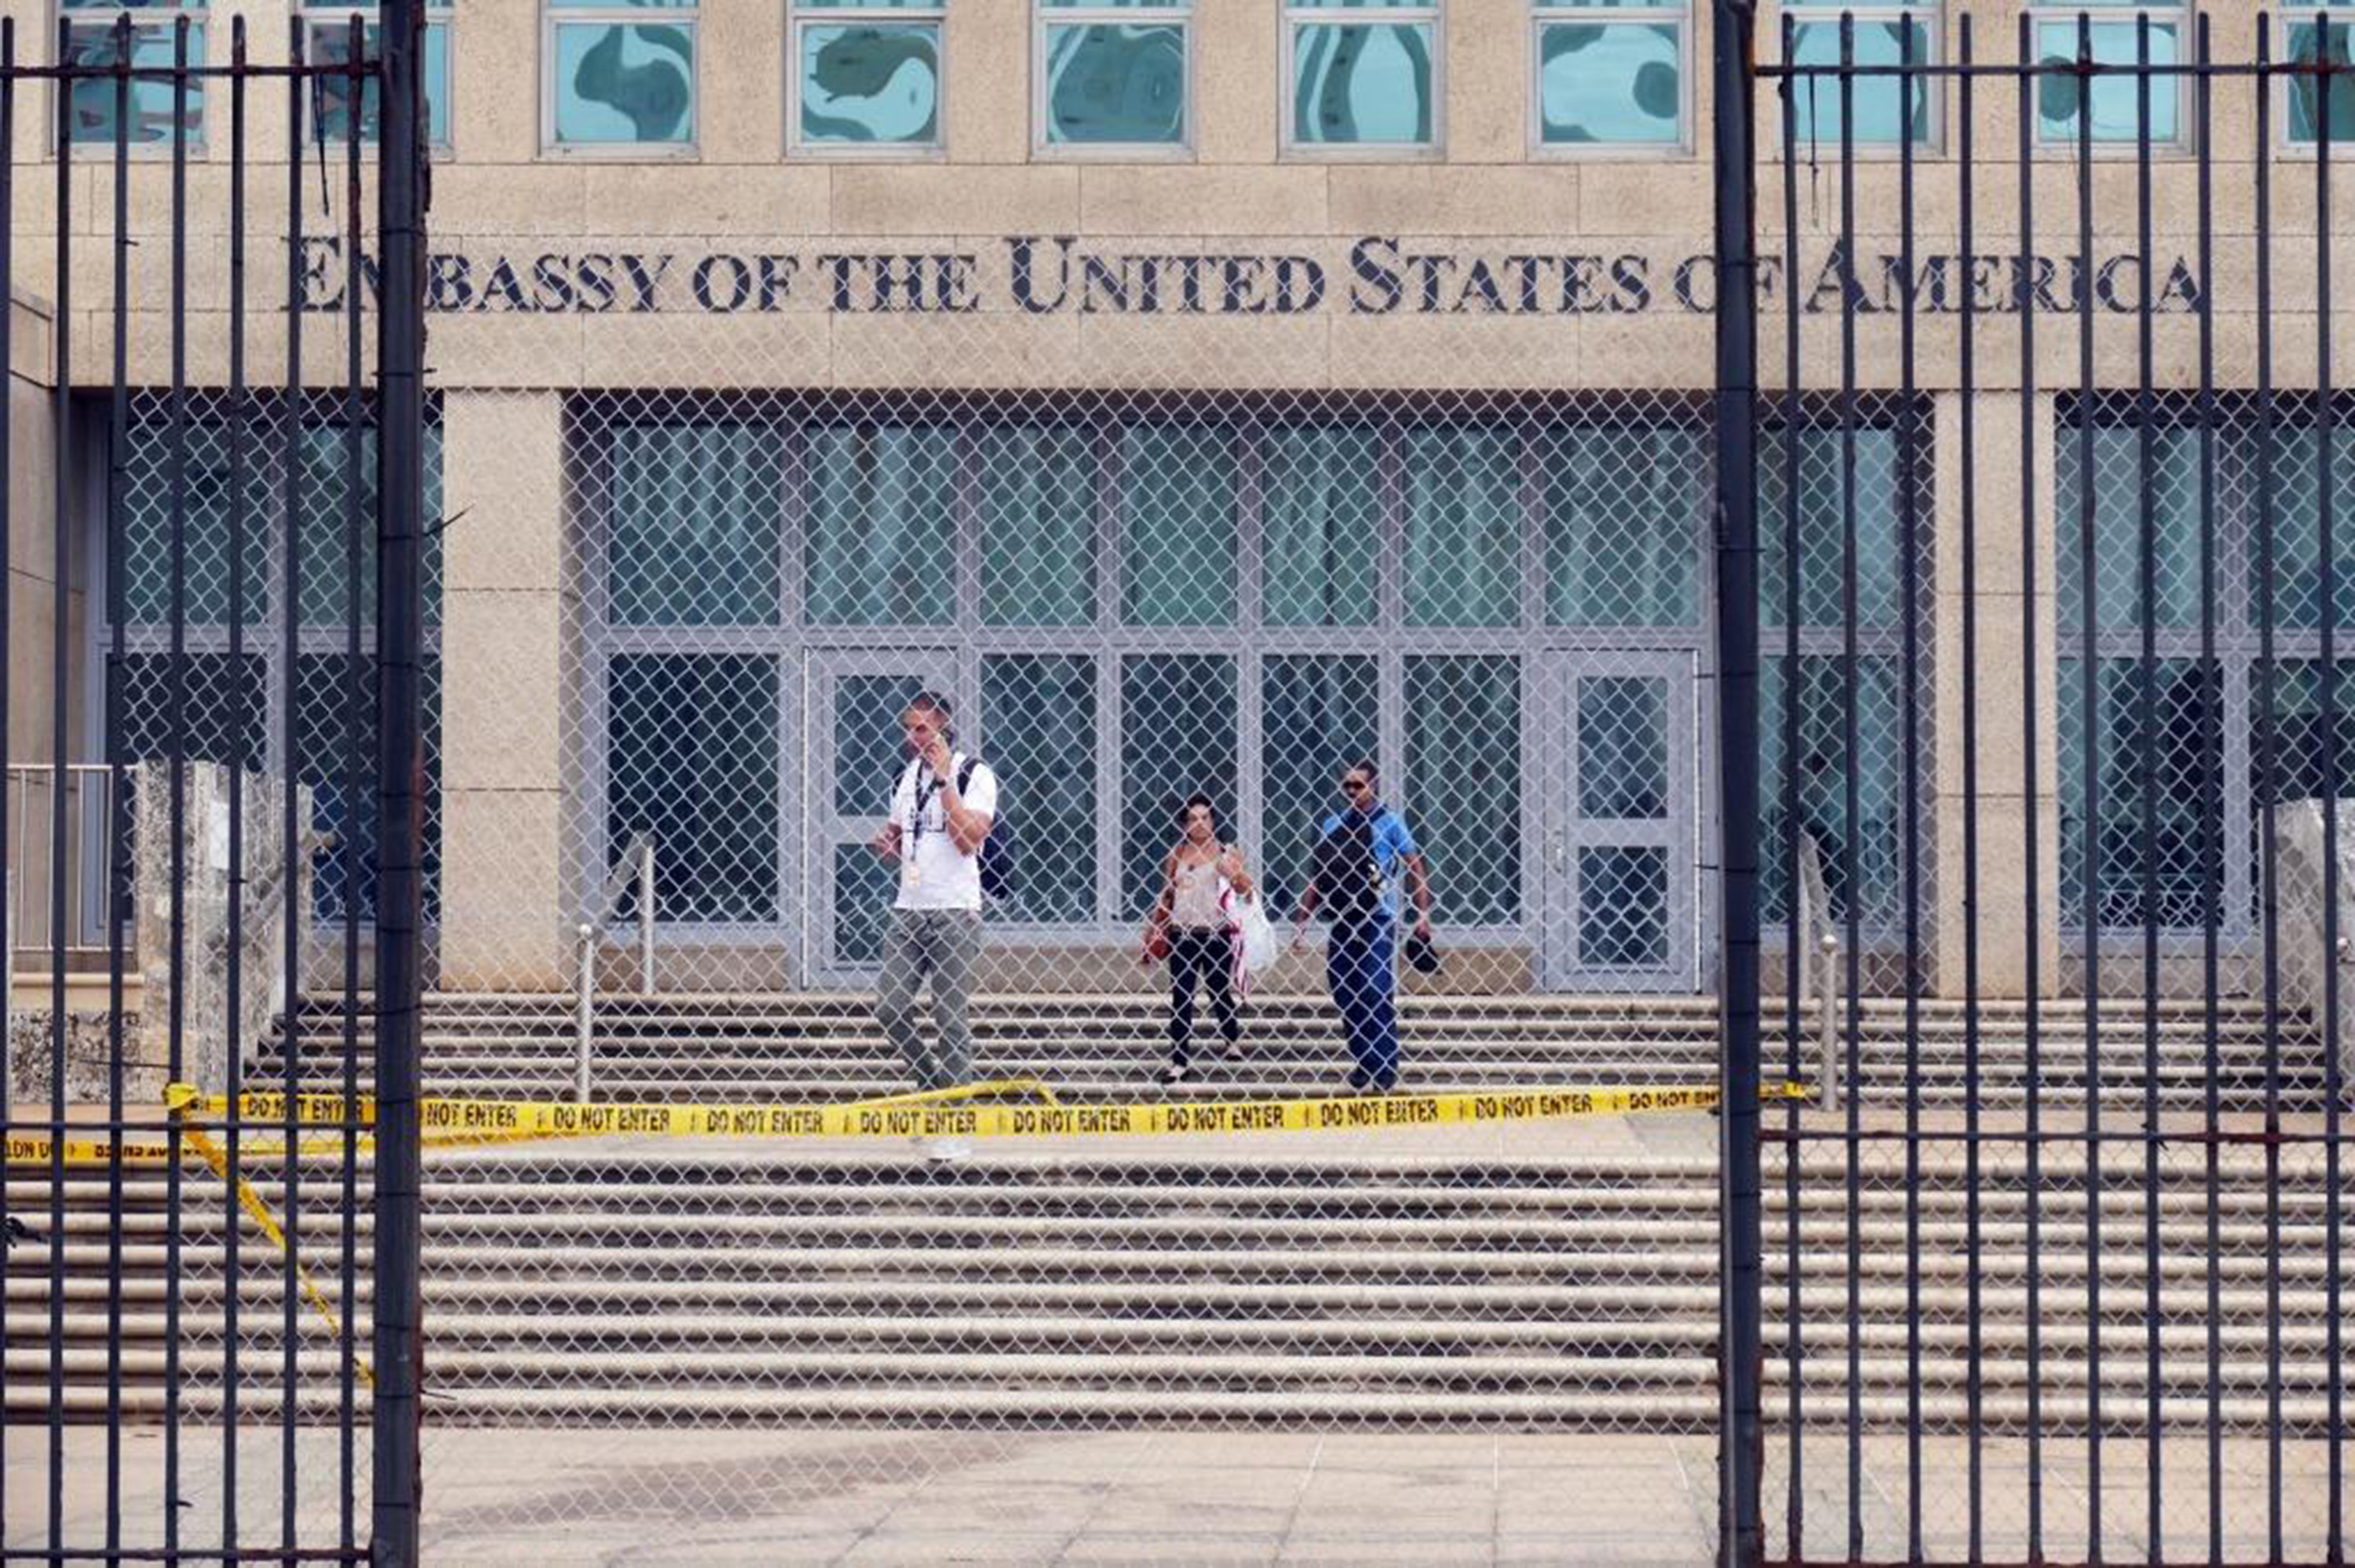 People on the steps of a building titled Embassy of the United States of America, seen through an open wrought iron gate.